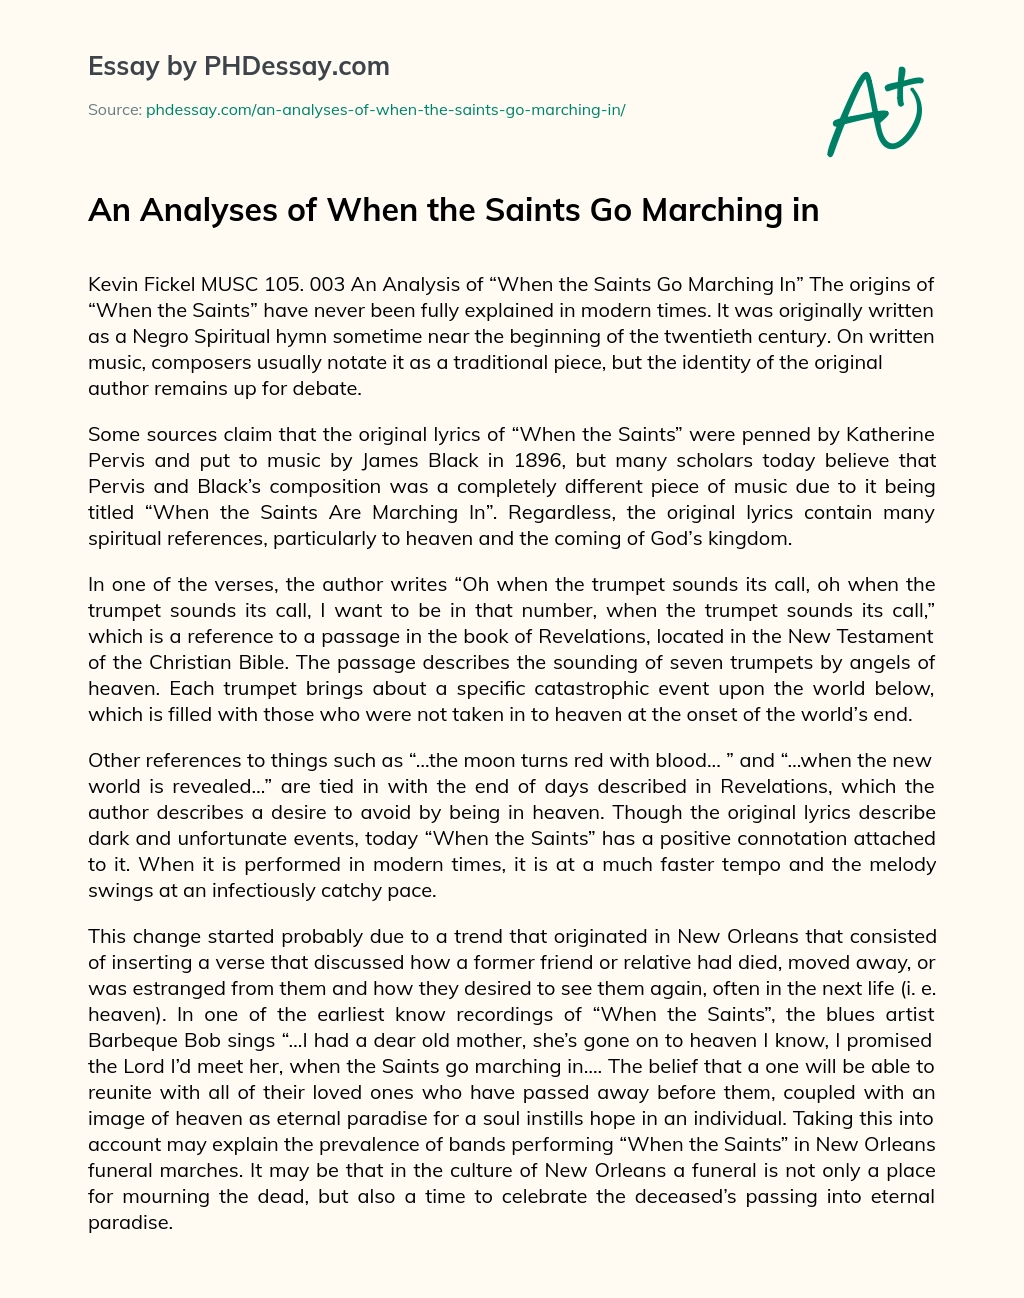 An Analyses of When the Saints Go Marching in essay